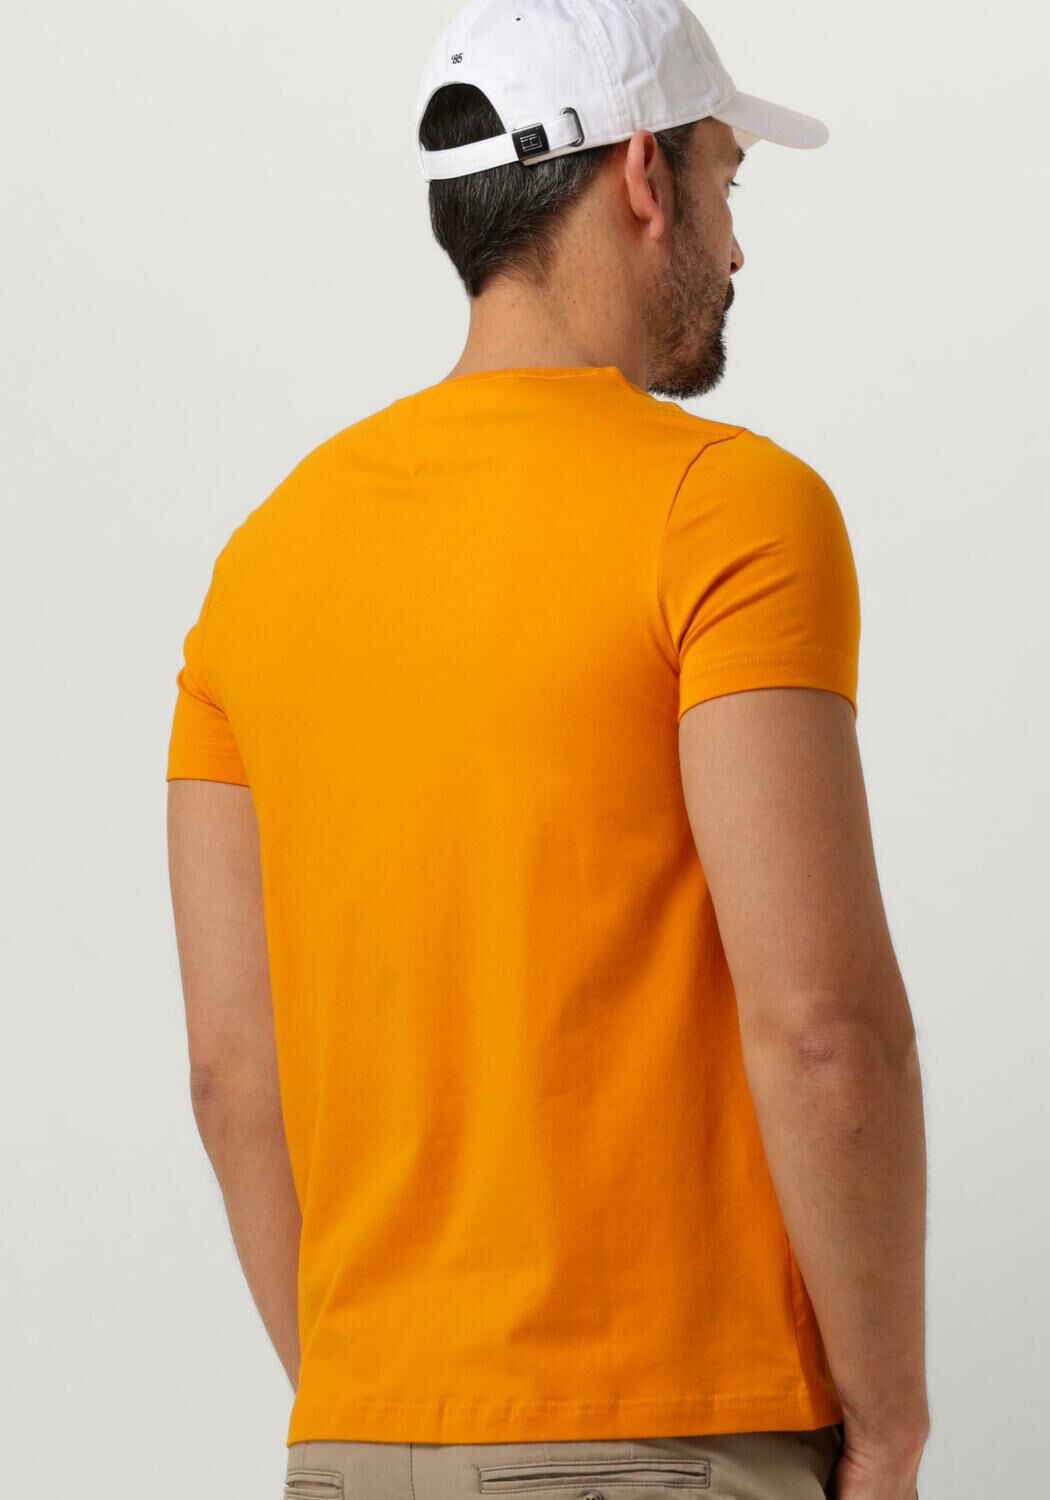 TOMMY HILFIGER Heren Polo's & T-shirts Stretch Slim Fit Tee Oranje